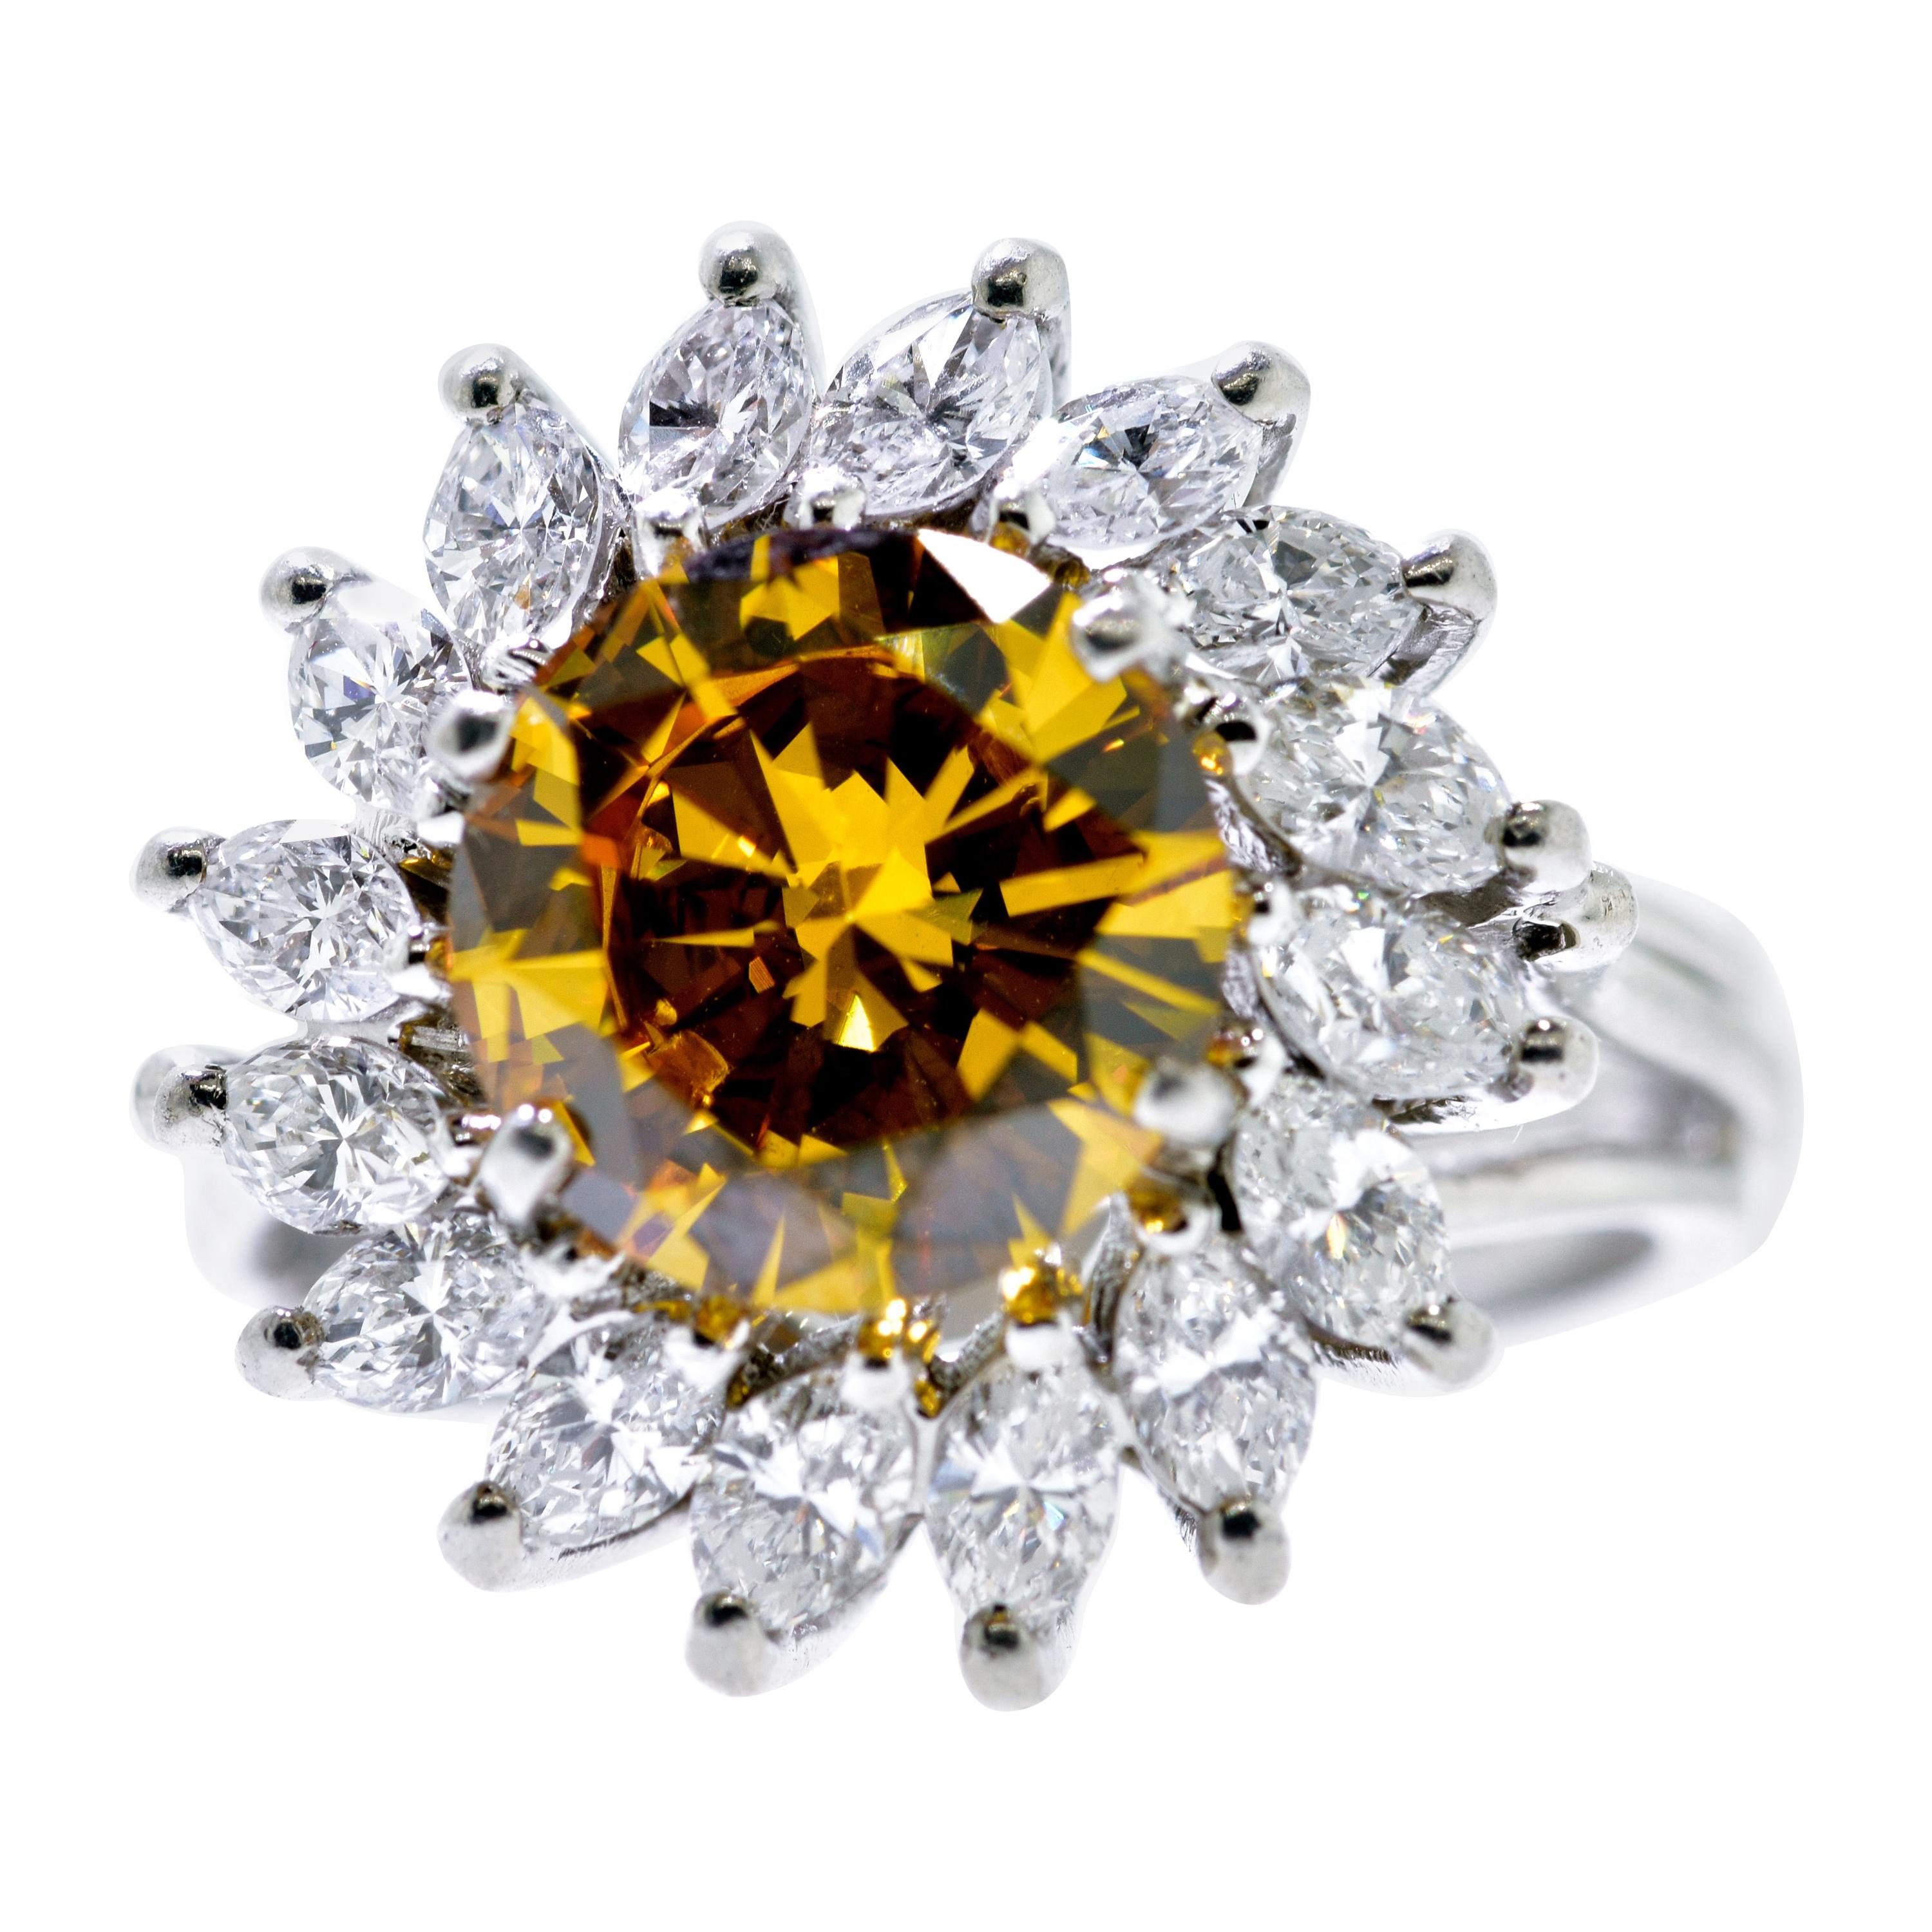 Fancy Cognac Diamond, 2.68 Carat Surrounded by White Diamond in a Platinum Ring